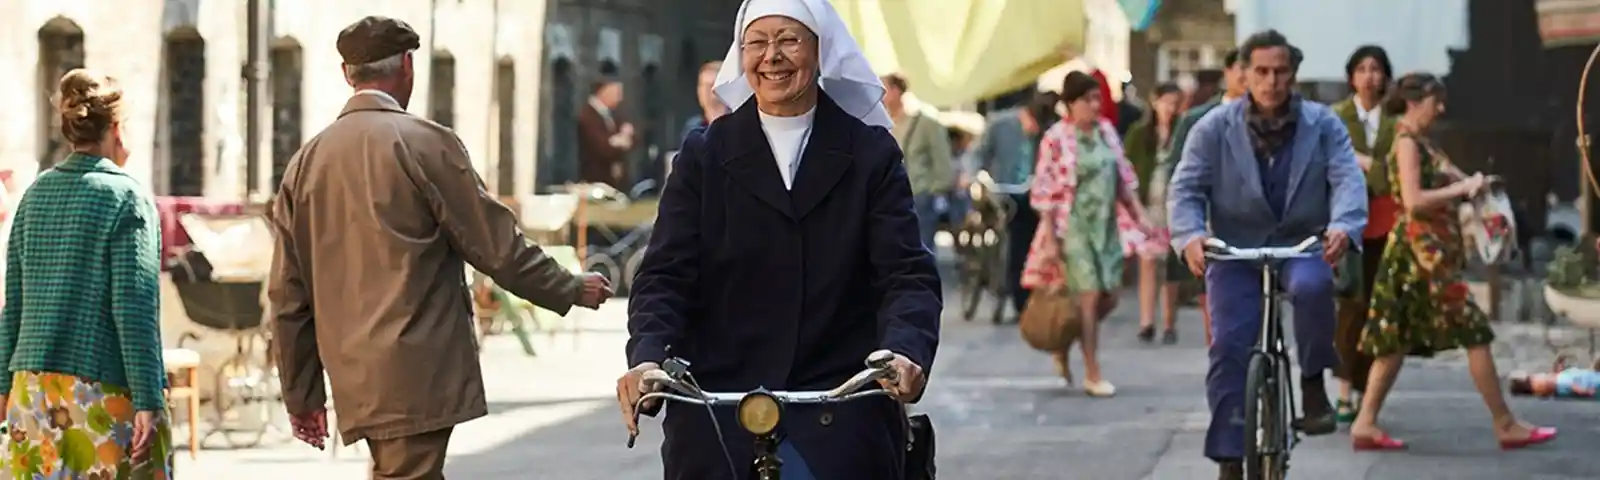 5. Call The Midwife At The Historic Dockyard Chatham C. Neal Street Productions